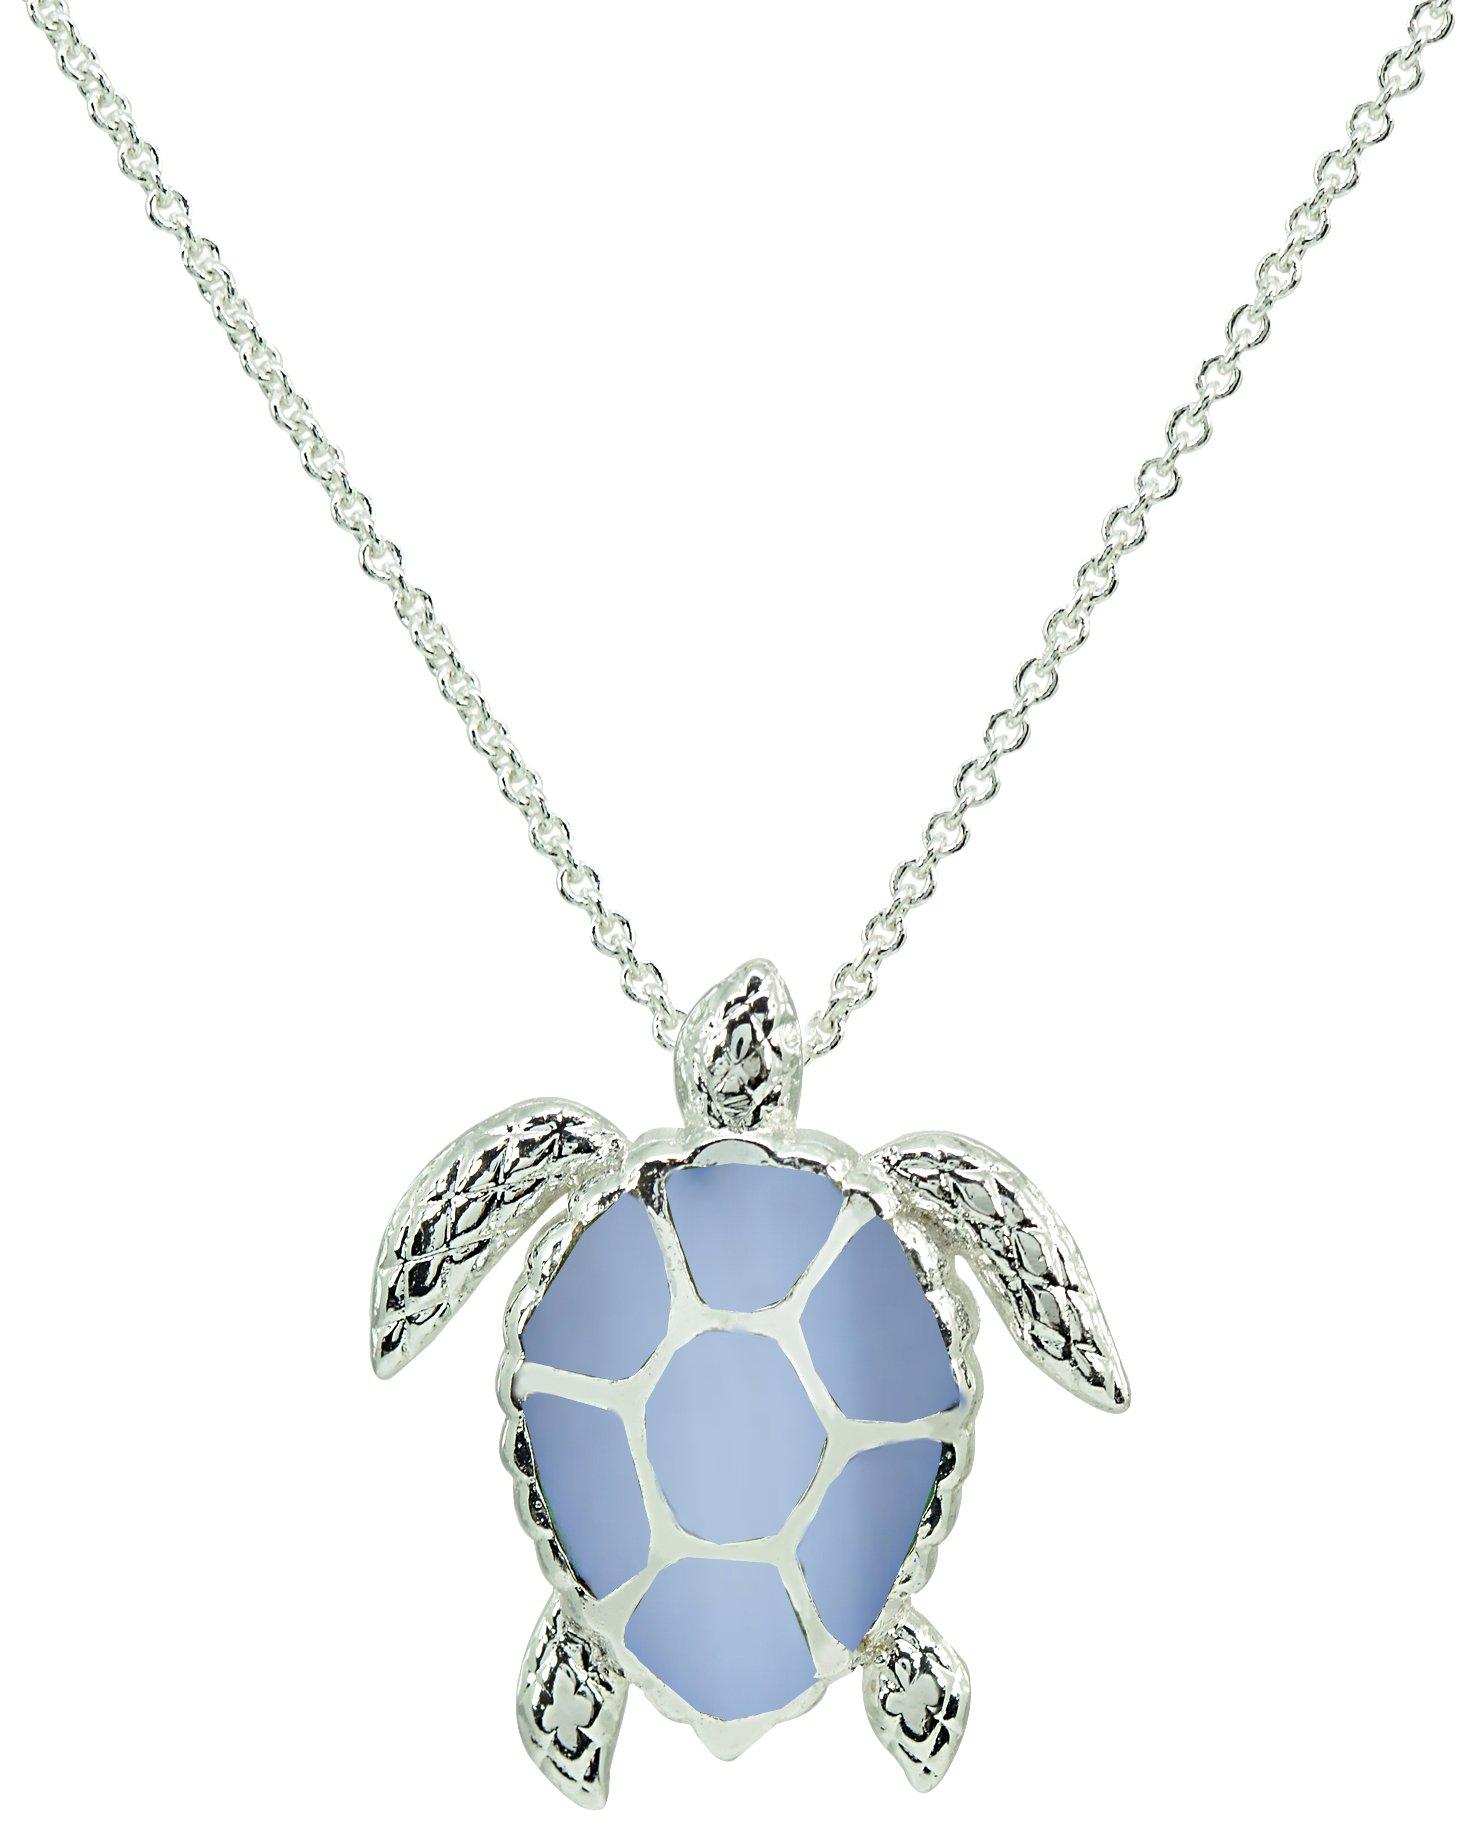 Silver Plated Sea Turtle Pendant Necklace